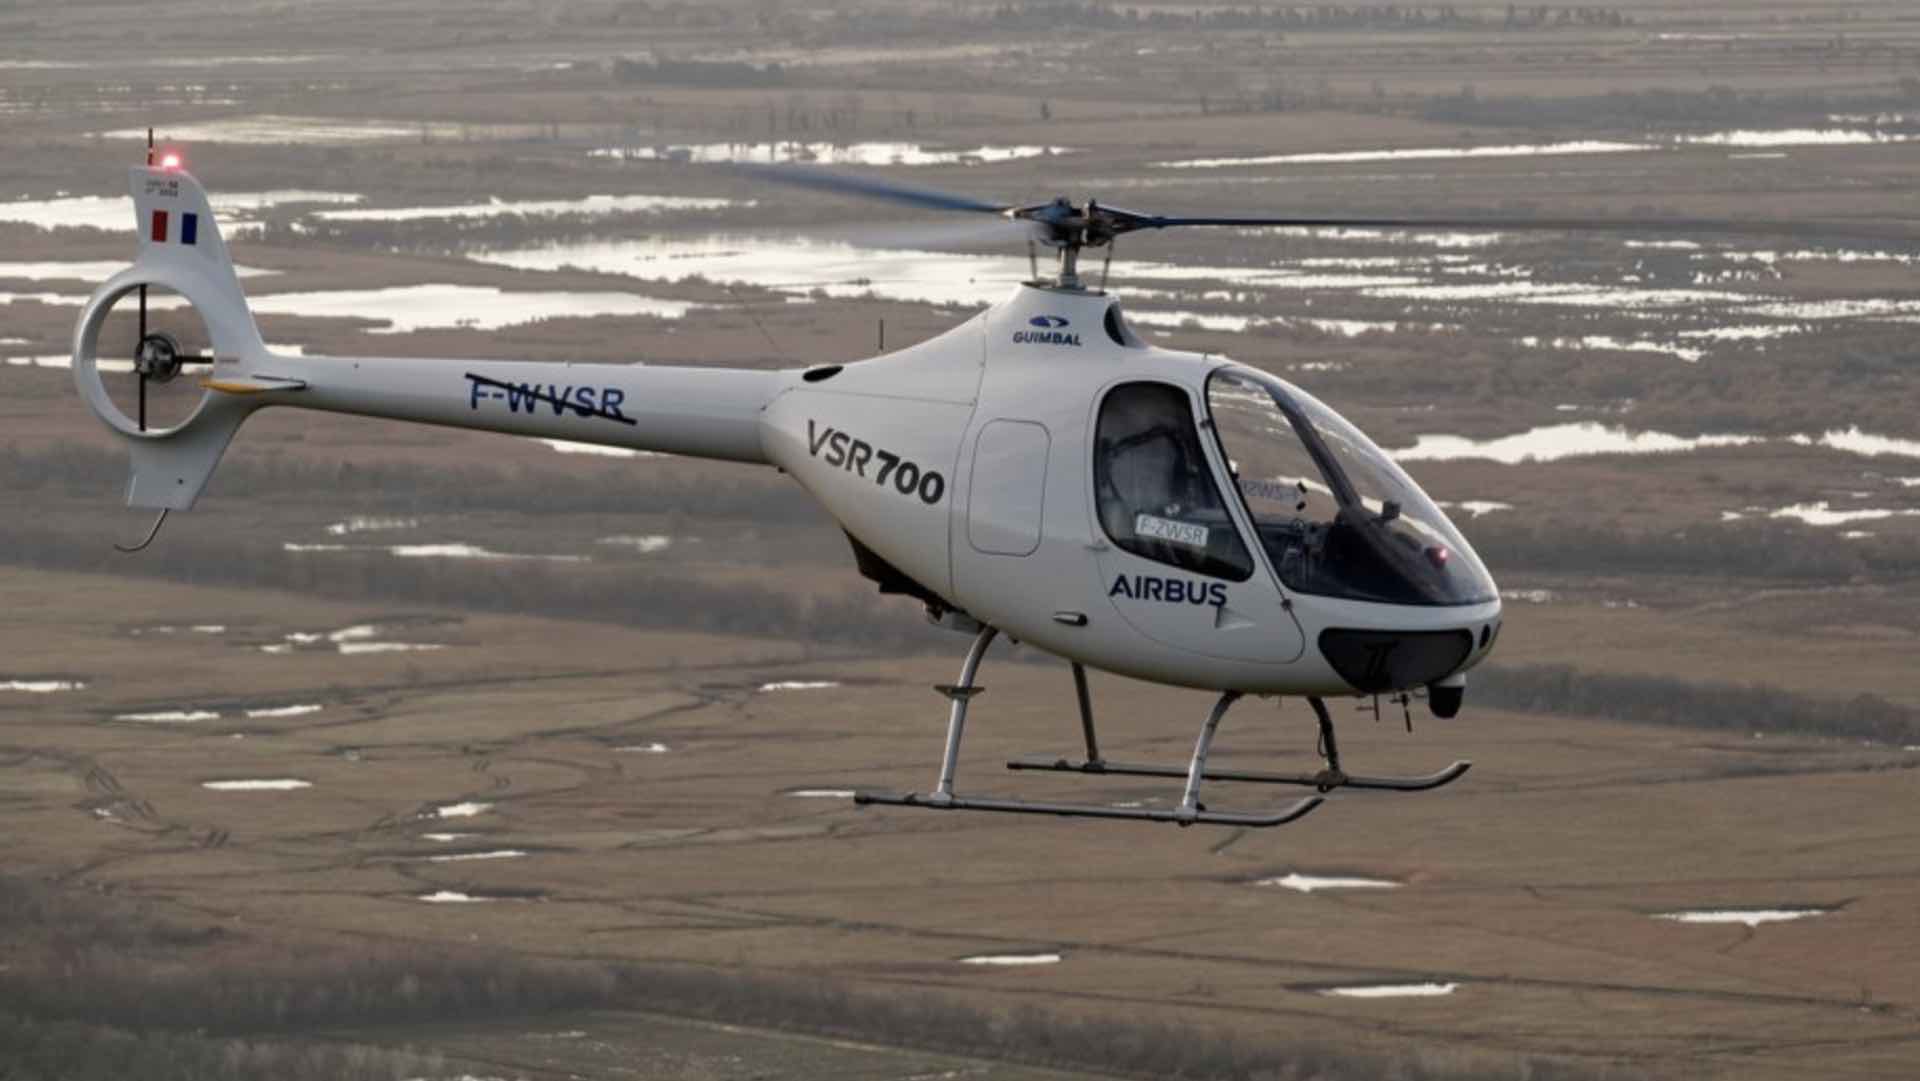 Airbus Helicopters VSR700